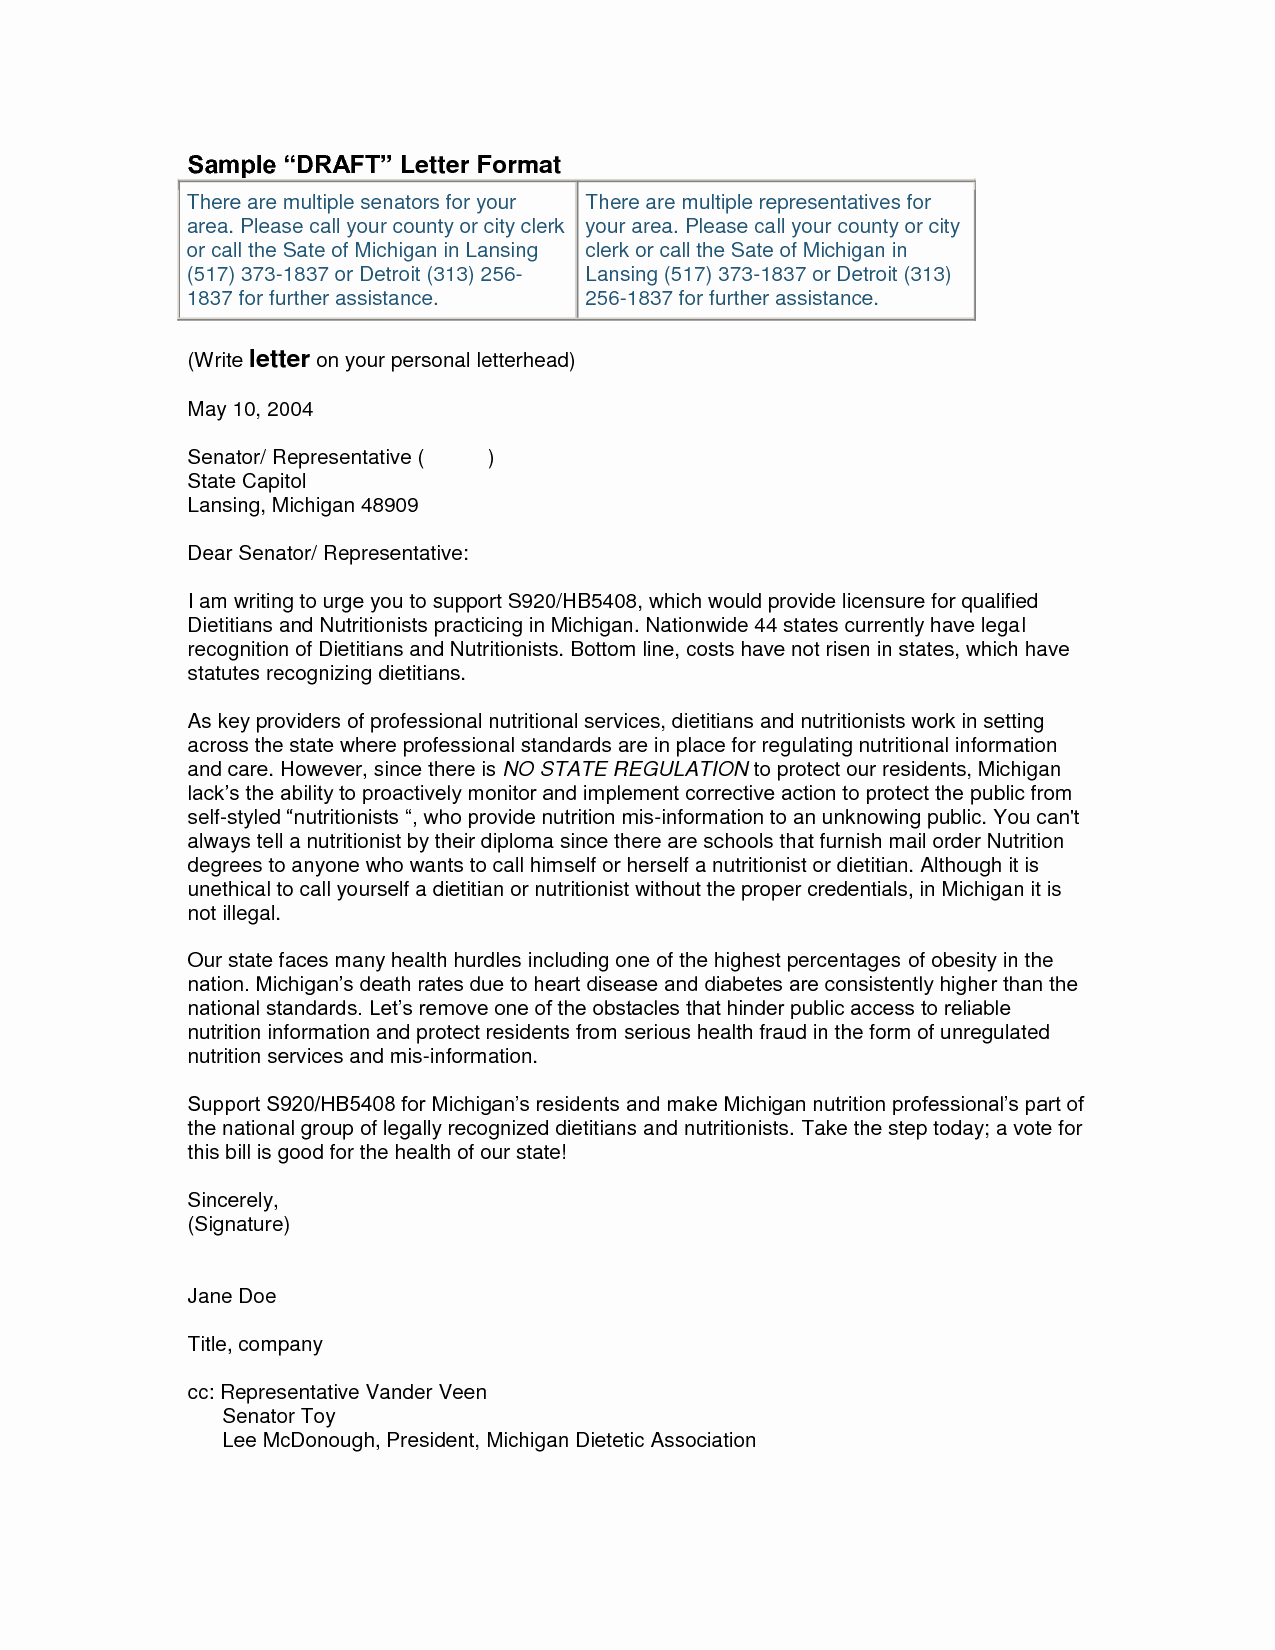 Business Letter format attachment Awesome Sample Letters with Cc